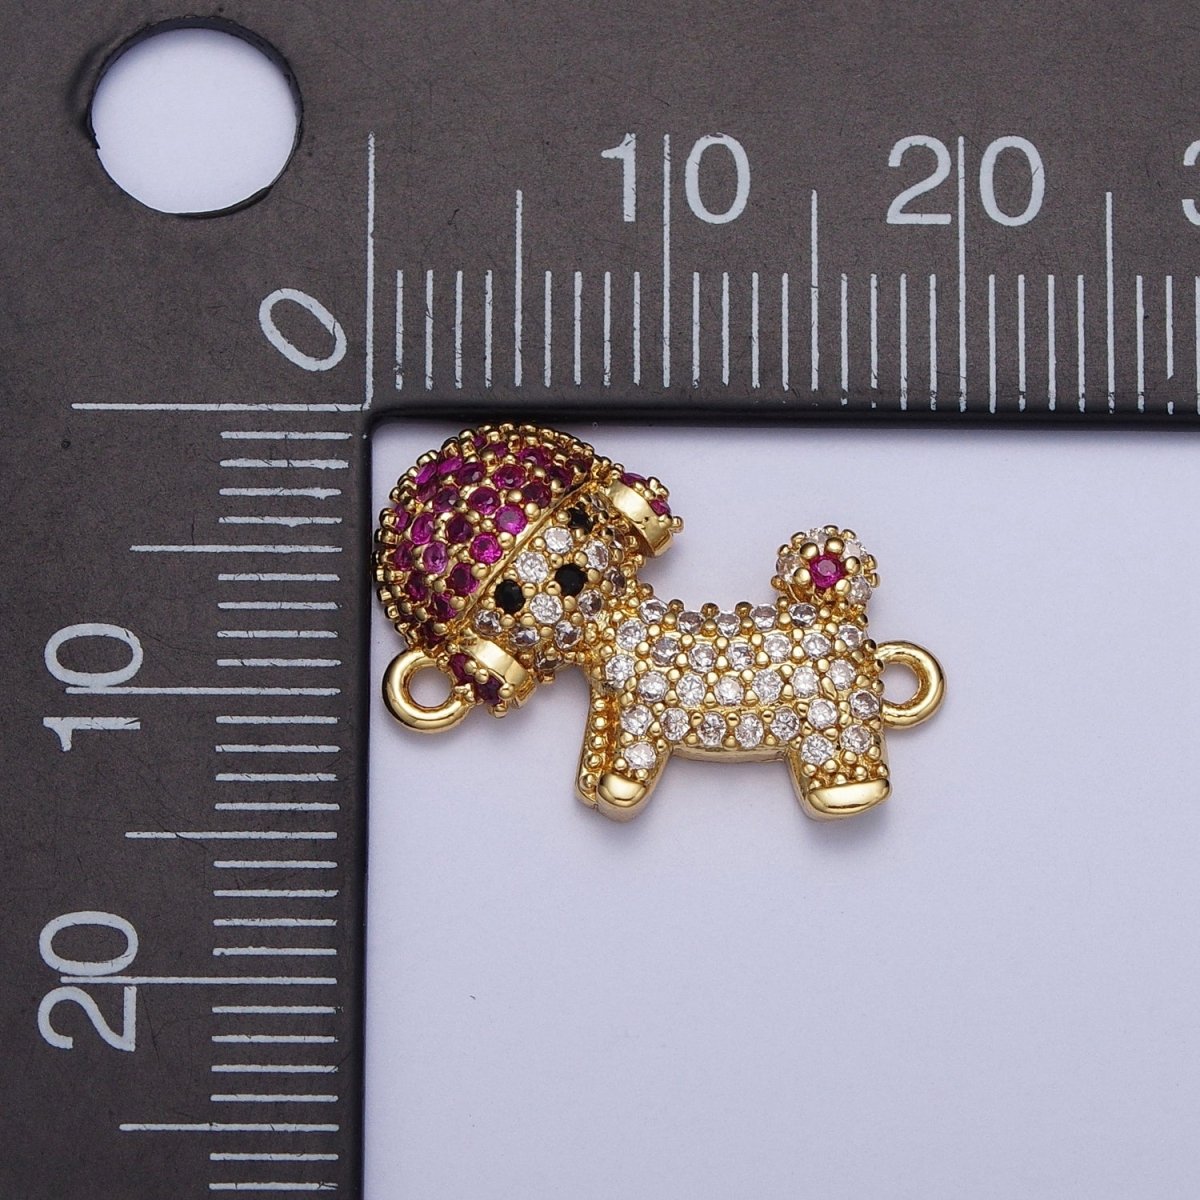 Fuchsia & Clear Micro Paved Little Dog Connector Charm For DIY Jewelry Making | G-530 - DLUXCA